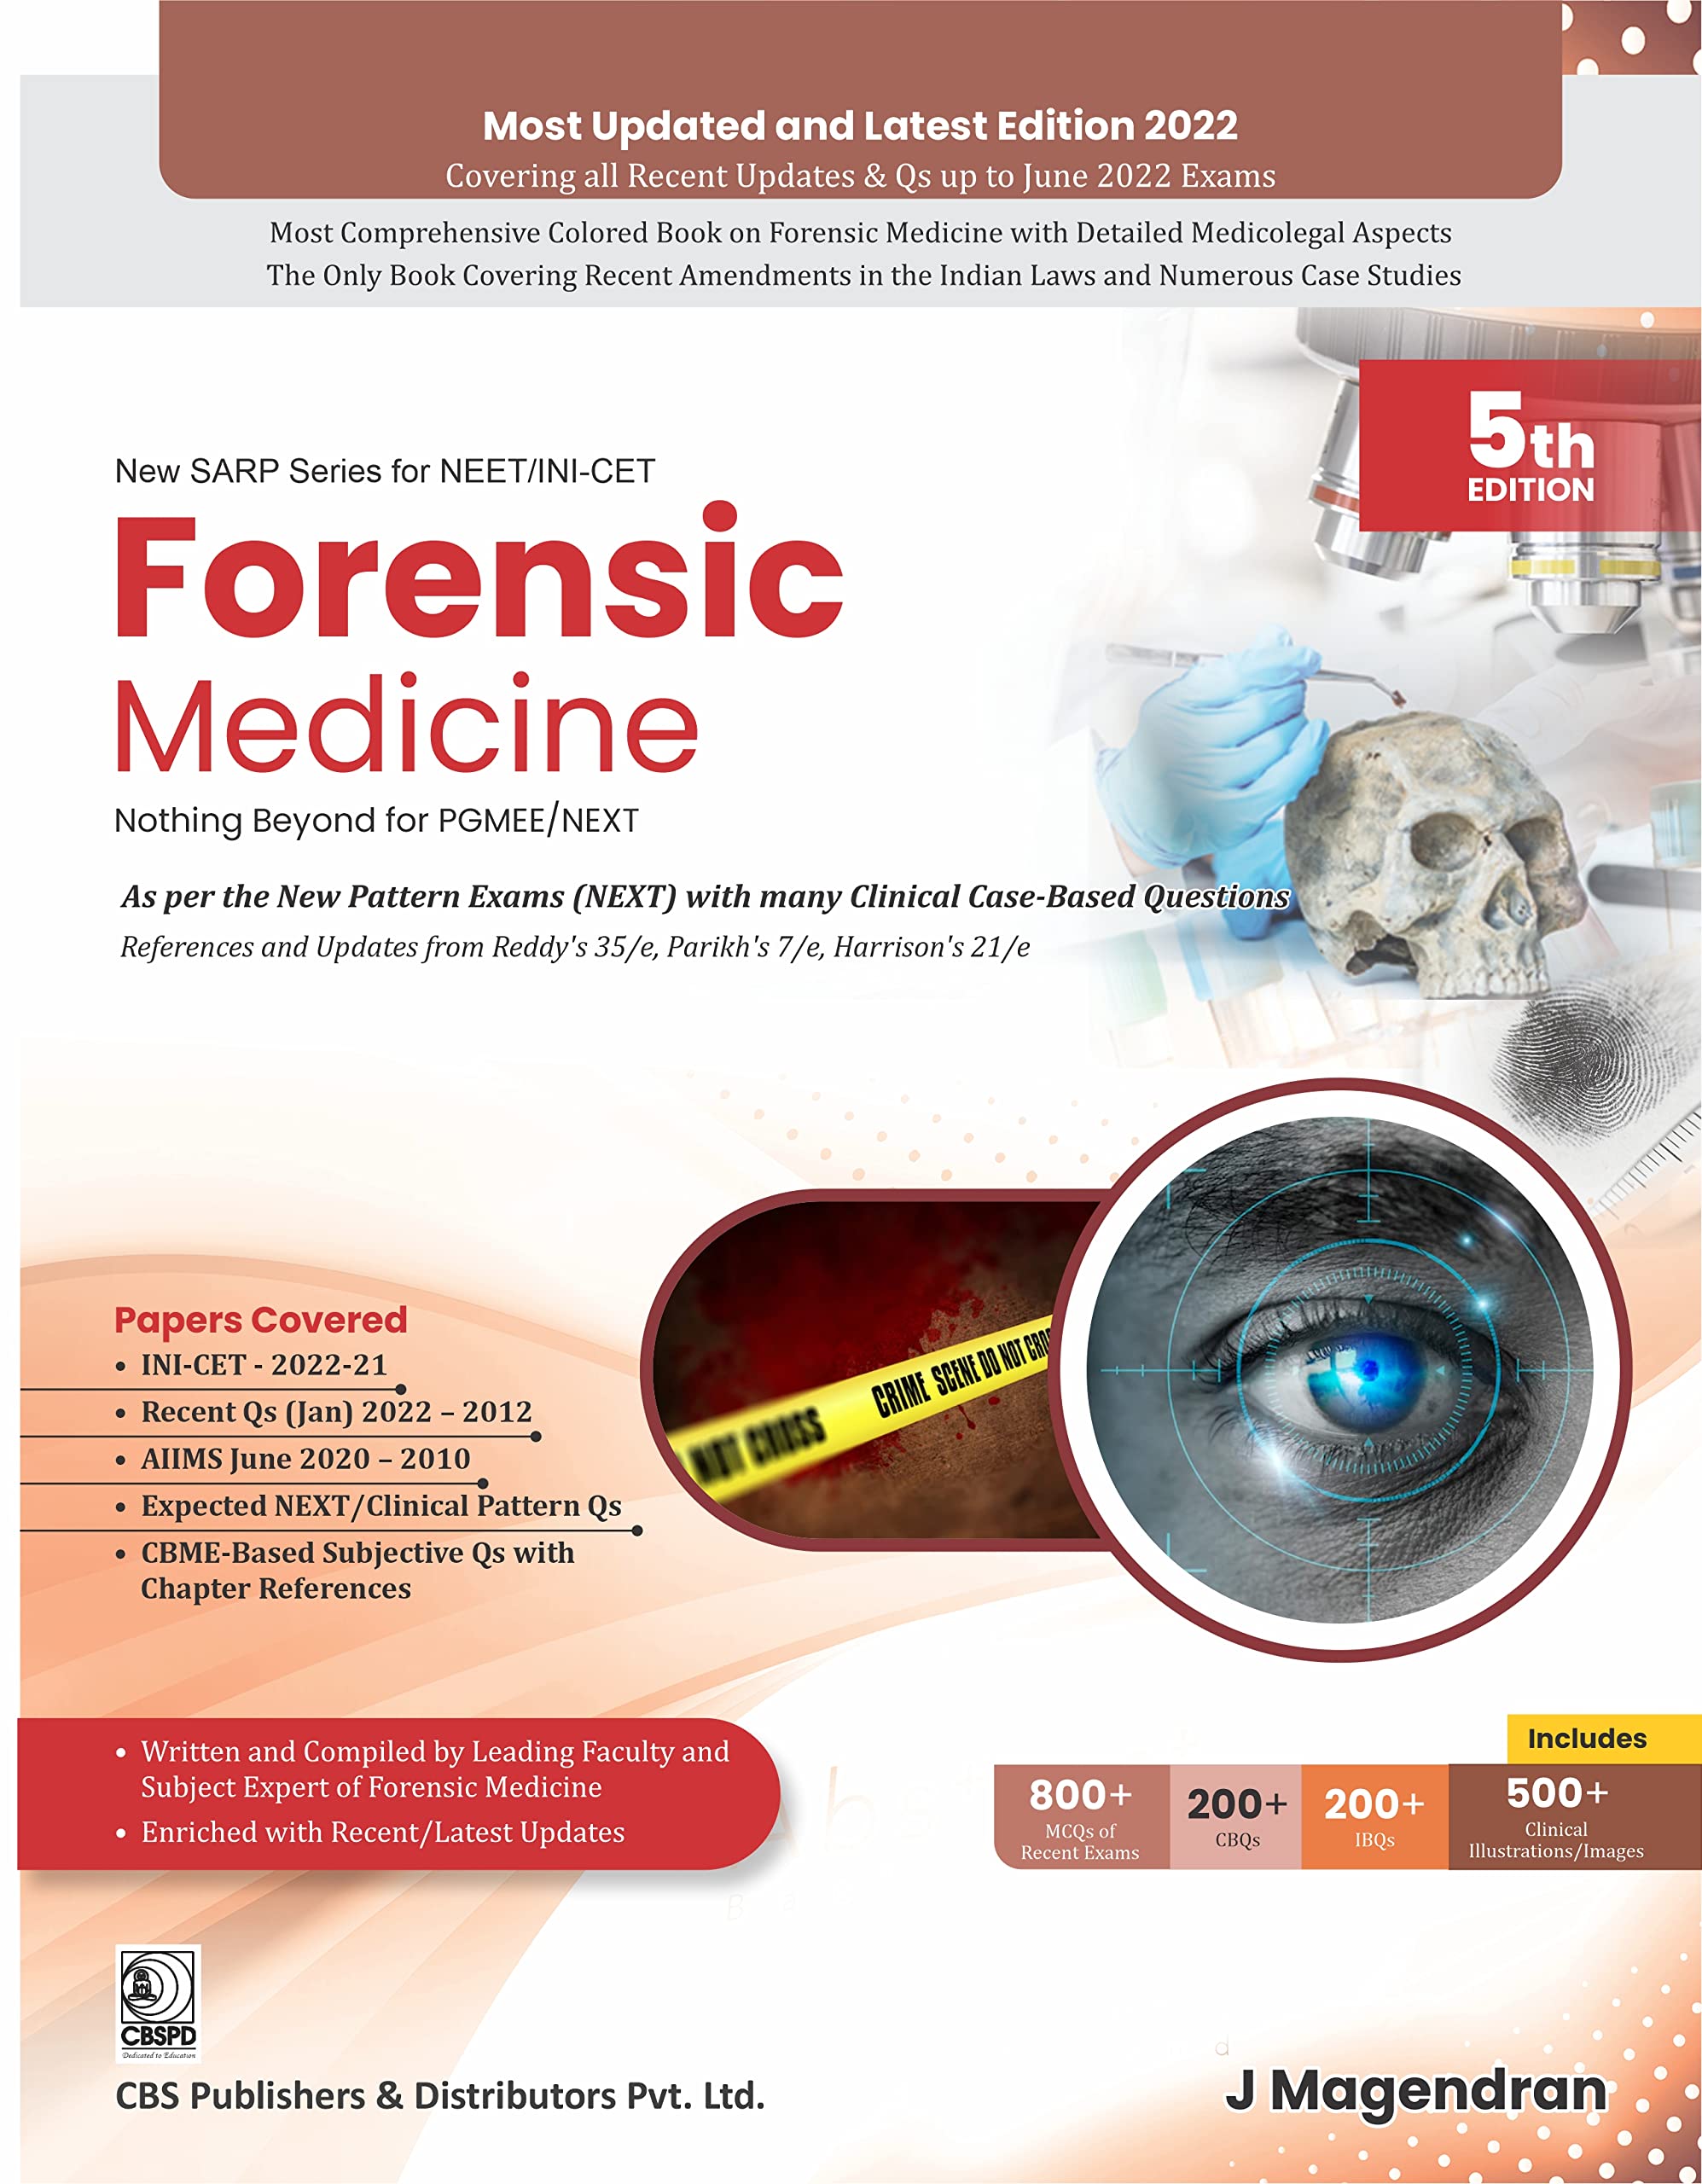 NEW SARP SERIES FOR NEET/INI-CET Forensic Medicine Nothing beyond for PGMEE/NEXT, 5th Ed